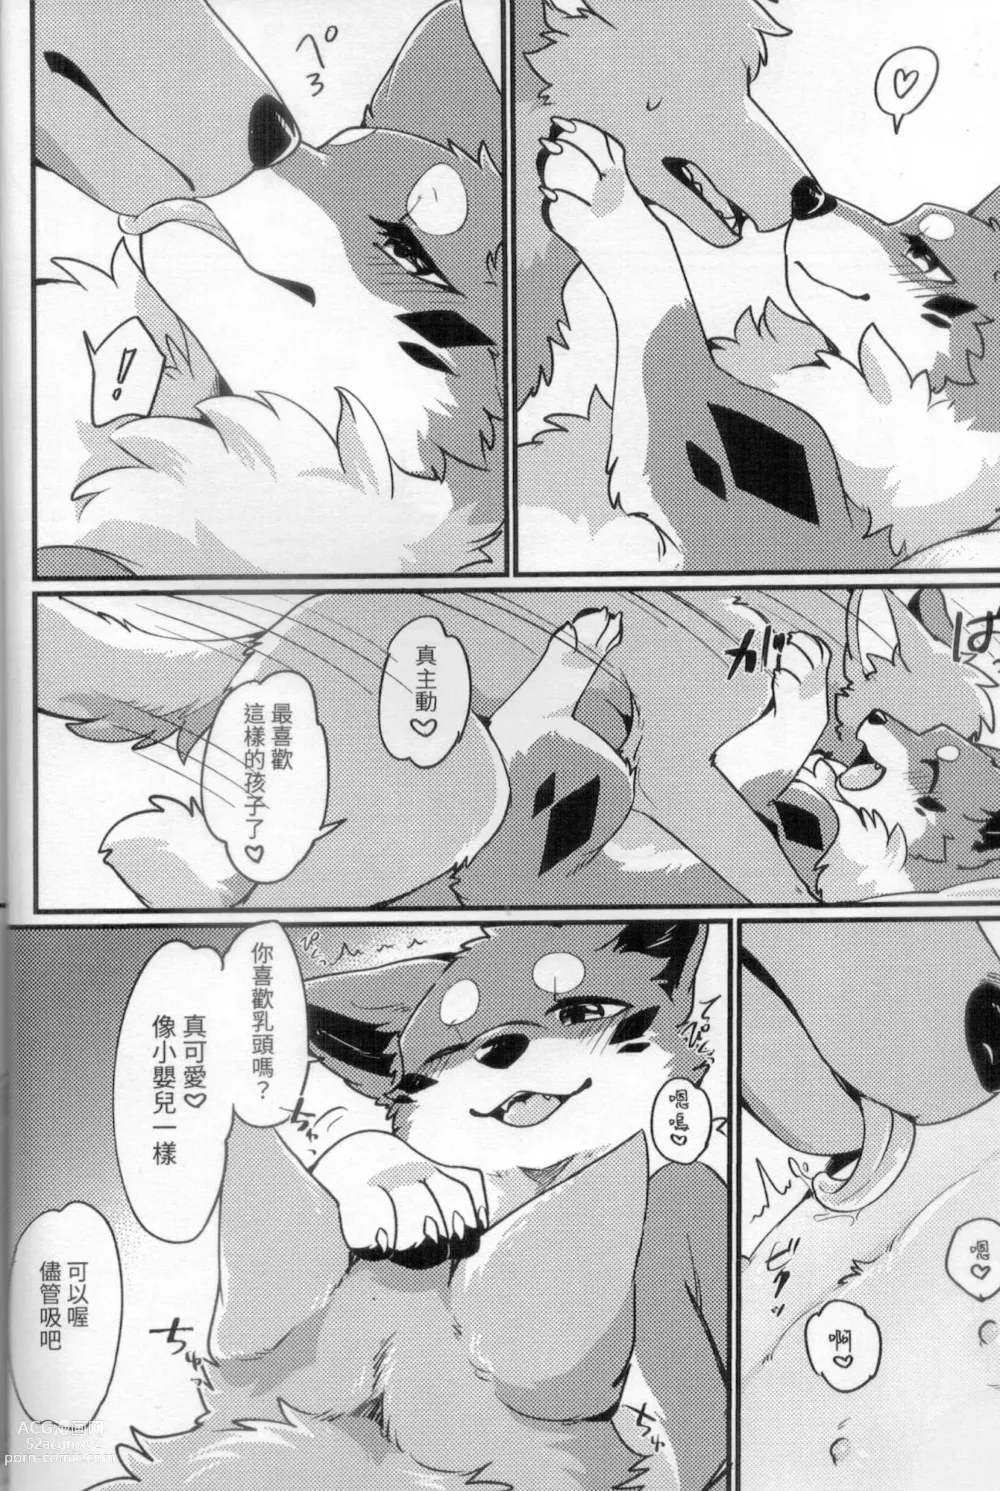 Page 9 of doujinshi 狐犬台灣美食旅